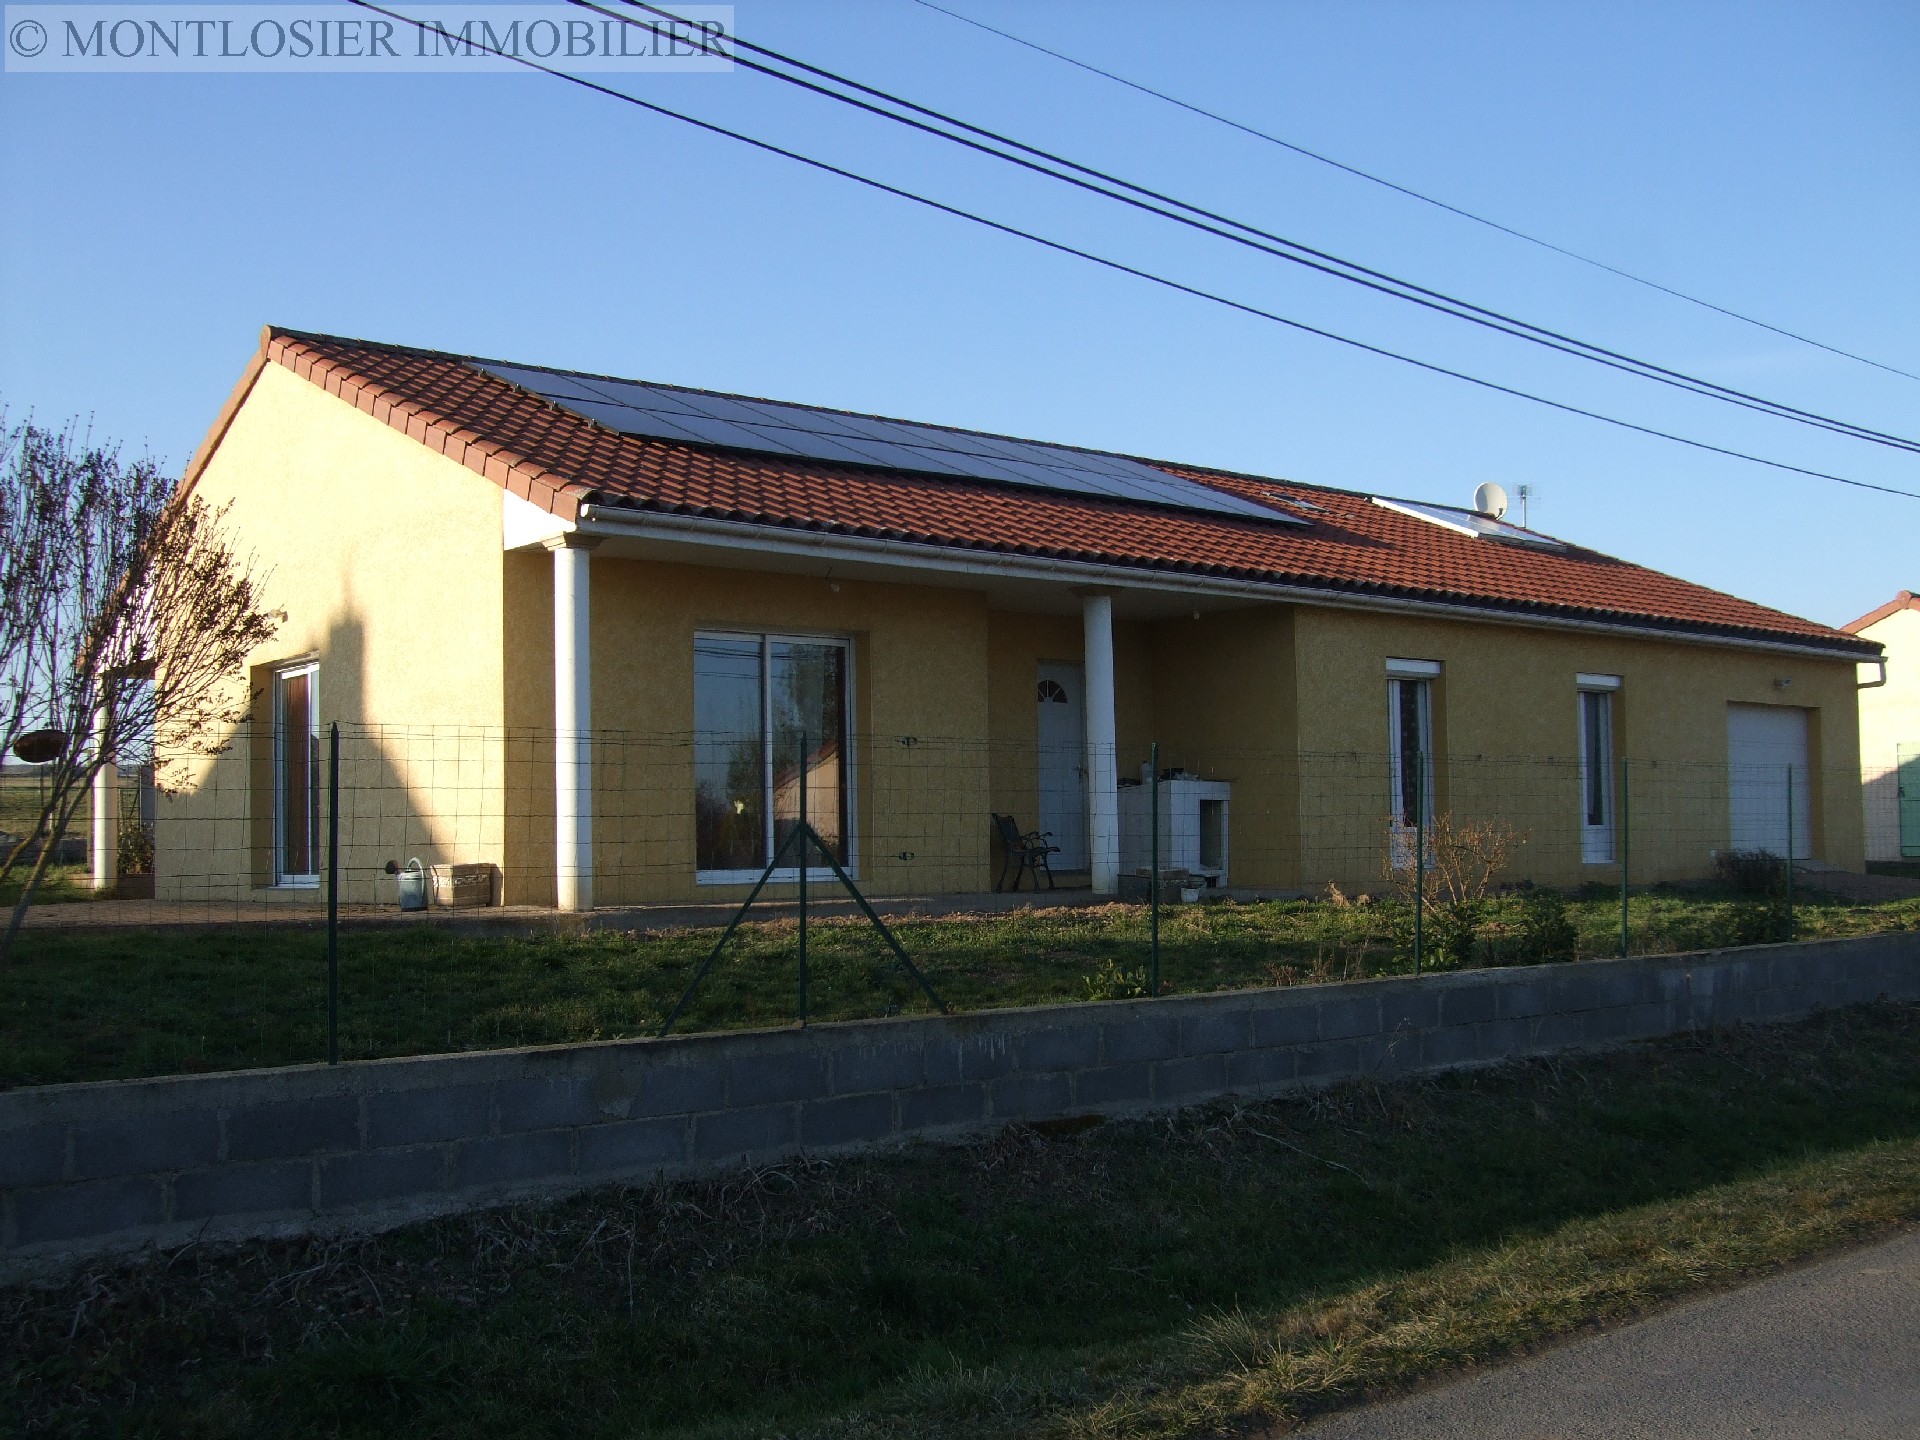 House A property to buy, , 145 m², 5 rooms